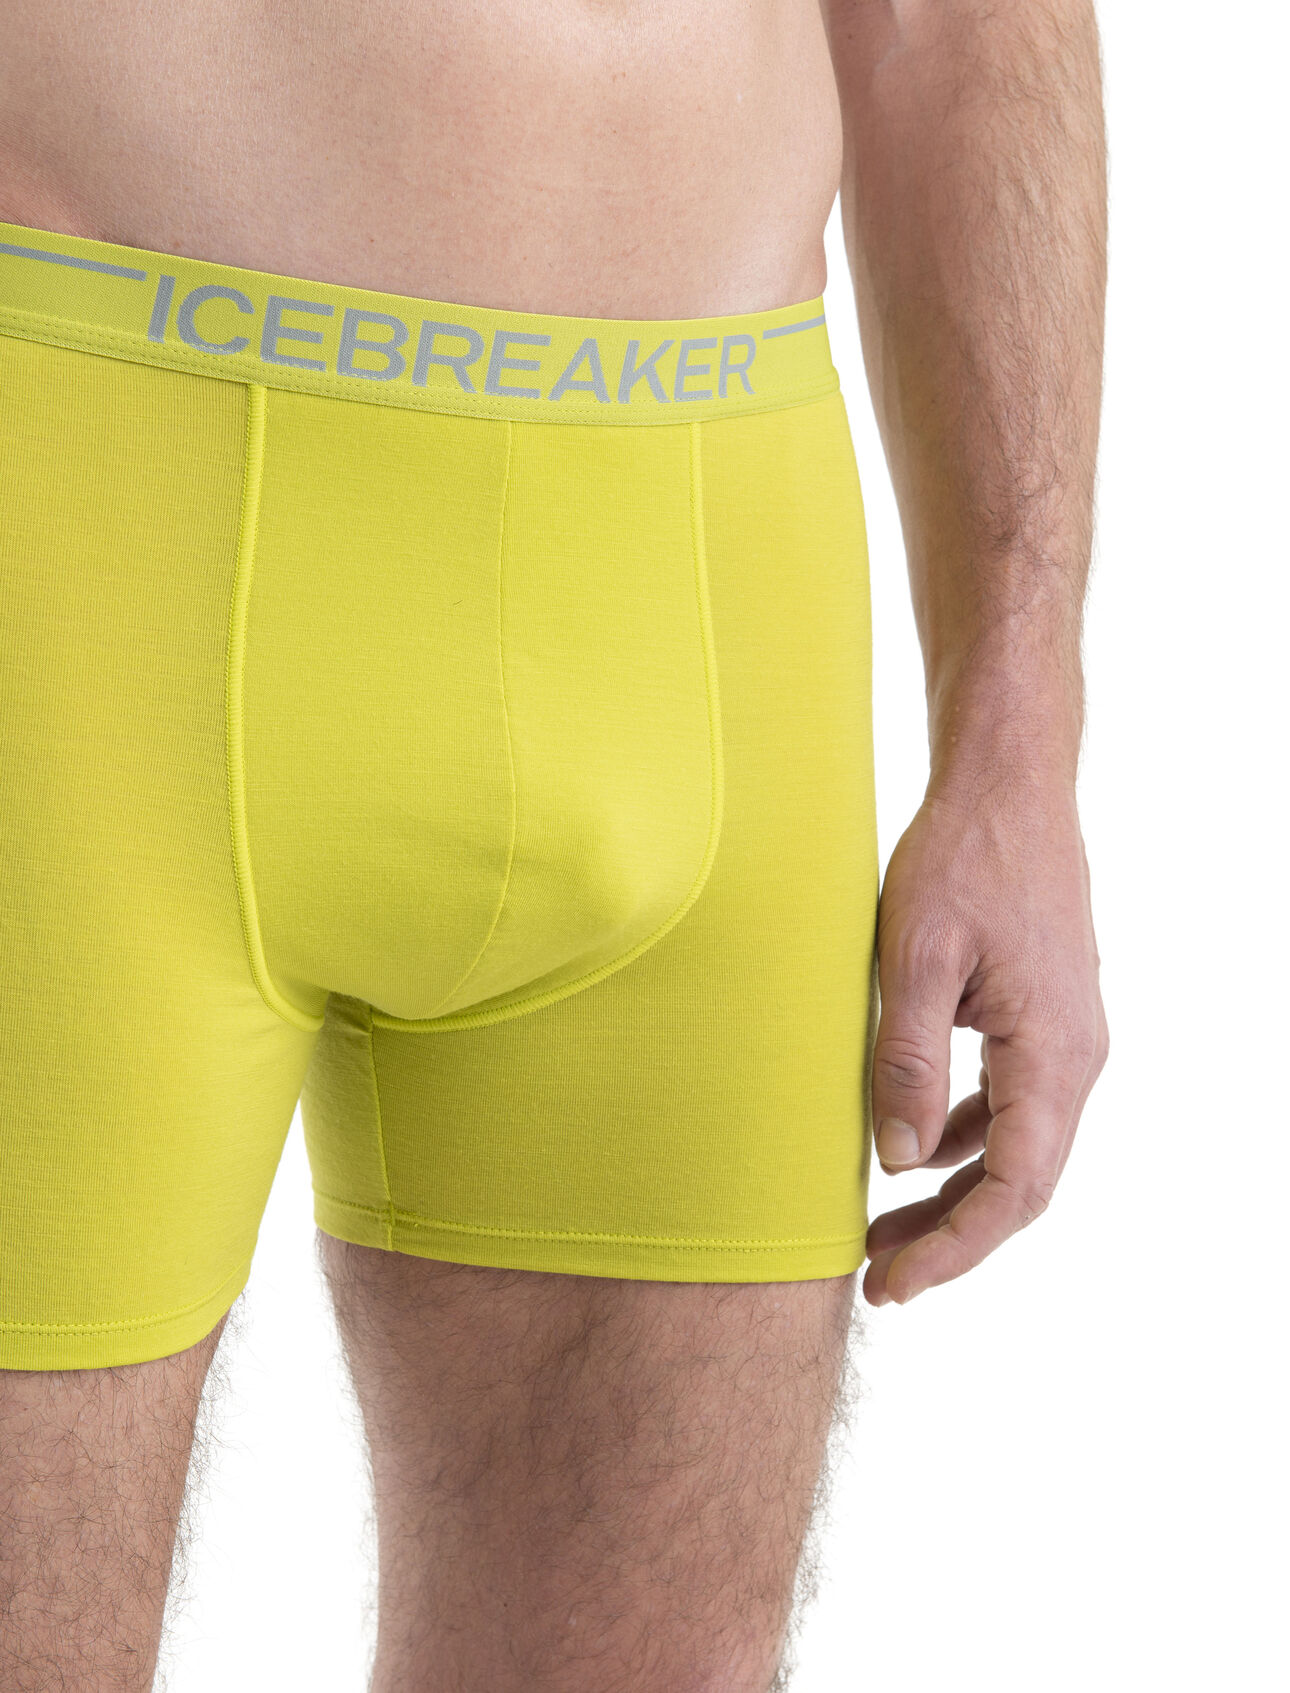 Icebreaker Anatomica Boxers (M) Panther 415160283574